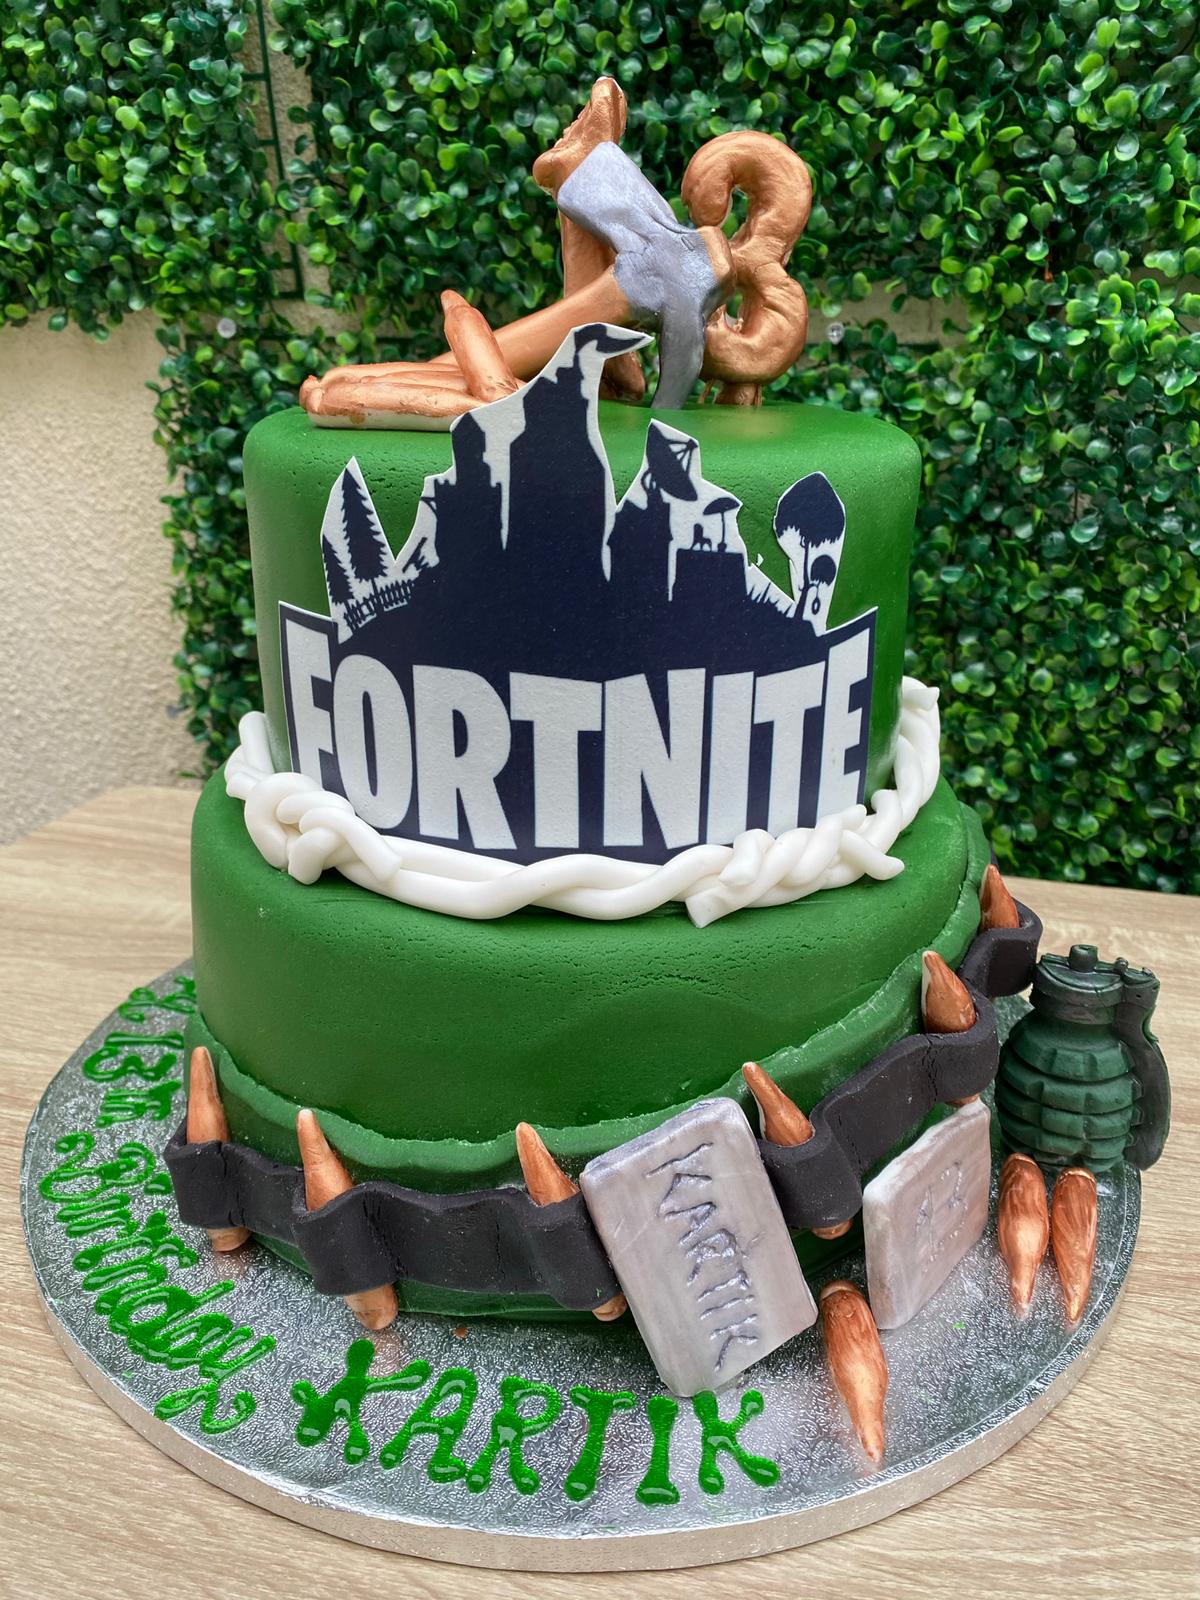 Fortnite Cake 🥳😎🍌🎂⛏💚💙 - Decorated Cake by Cherry on Top - CakesDecor